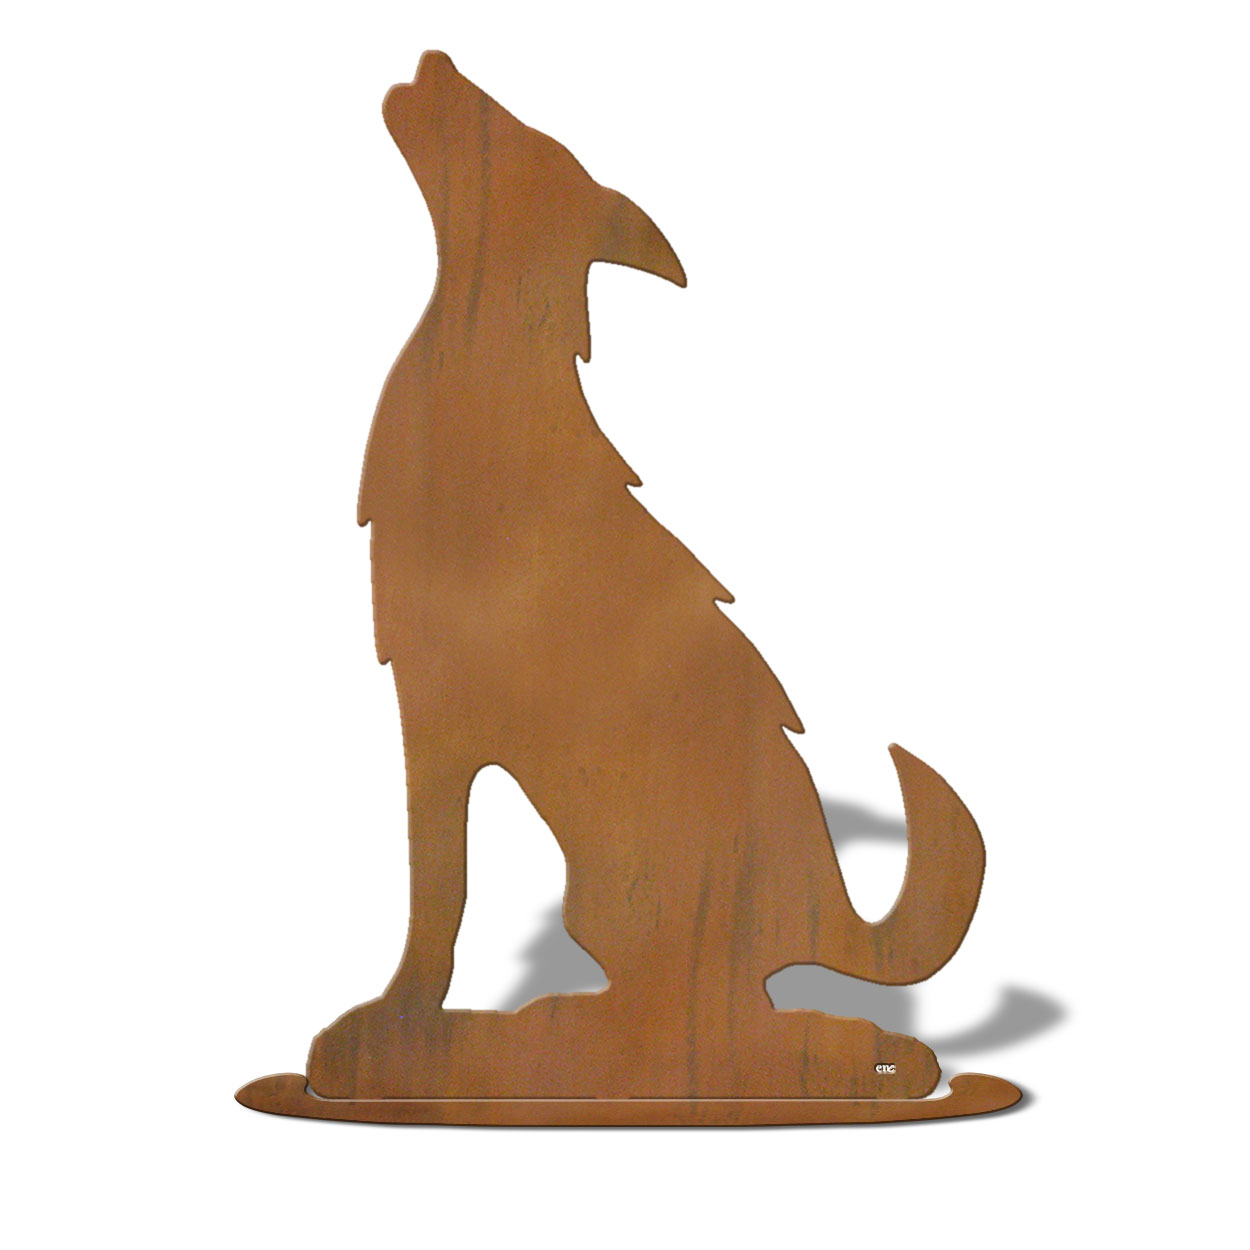 623409r - Tabletop Art - 12in x 18in - Coyote - Rust Patina